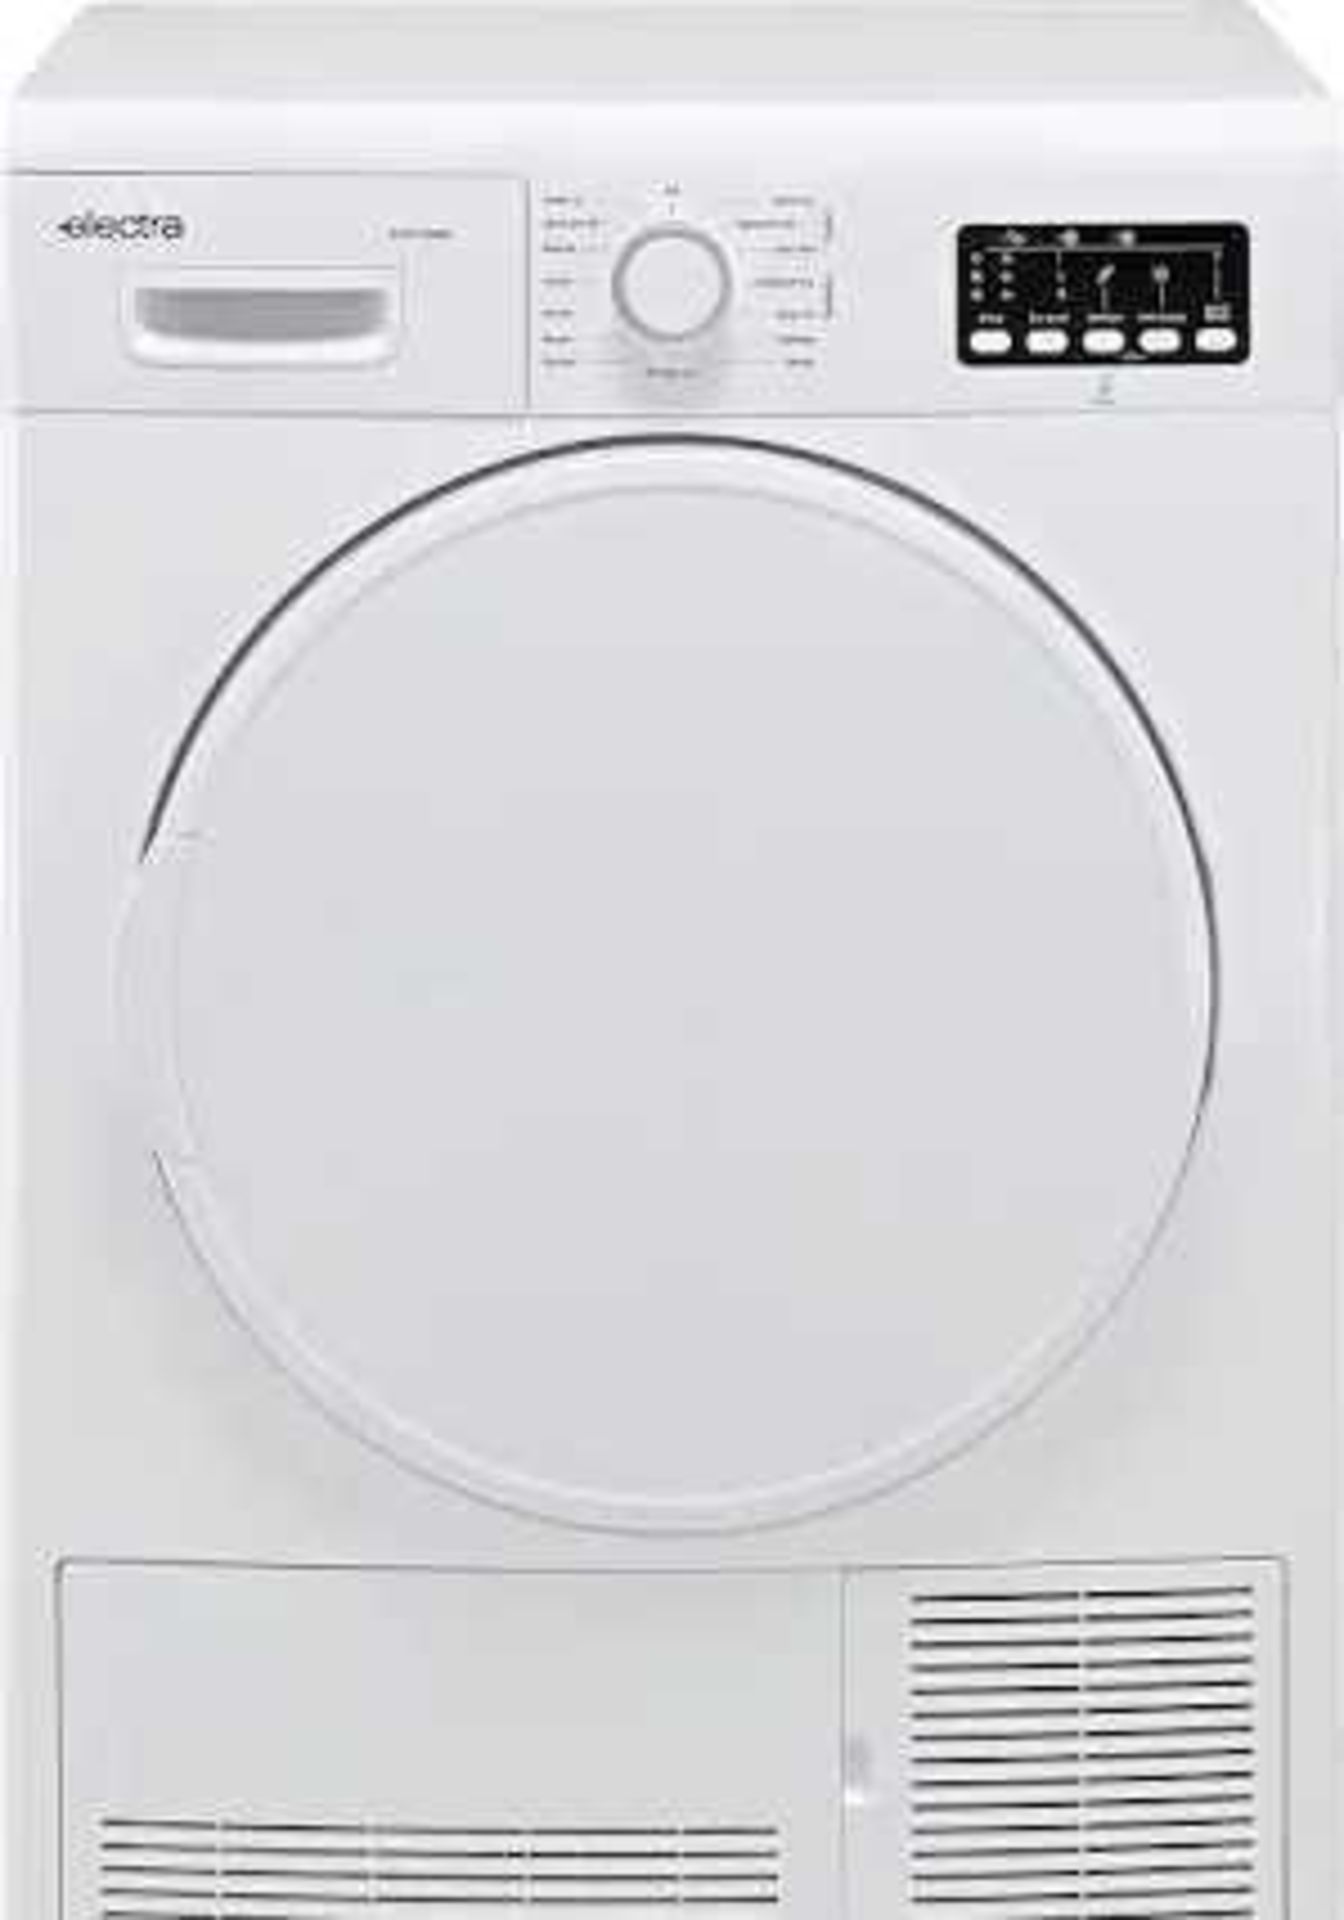 RRP £240 Lot Includes 1 Unboxed Electra Tdc7100W Washing Machine(Untested)(H)